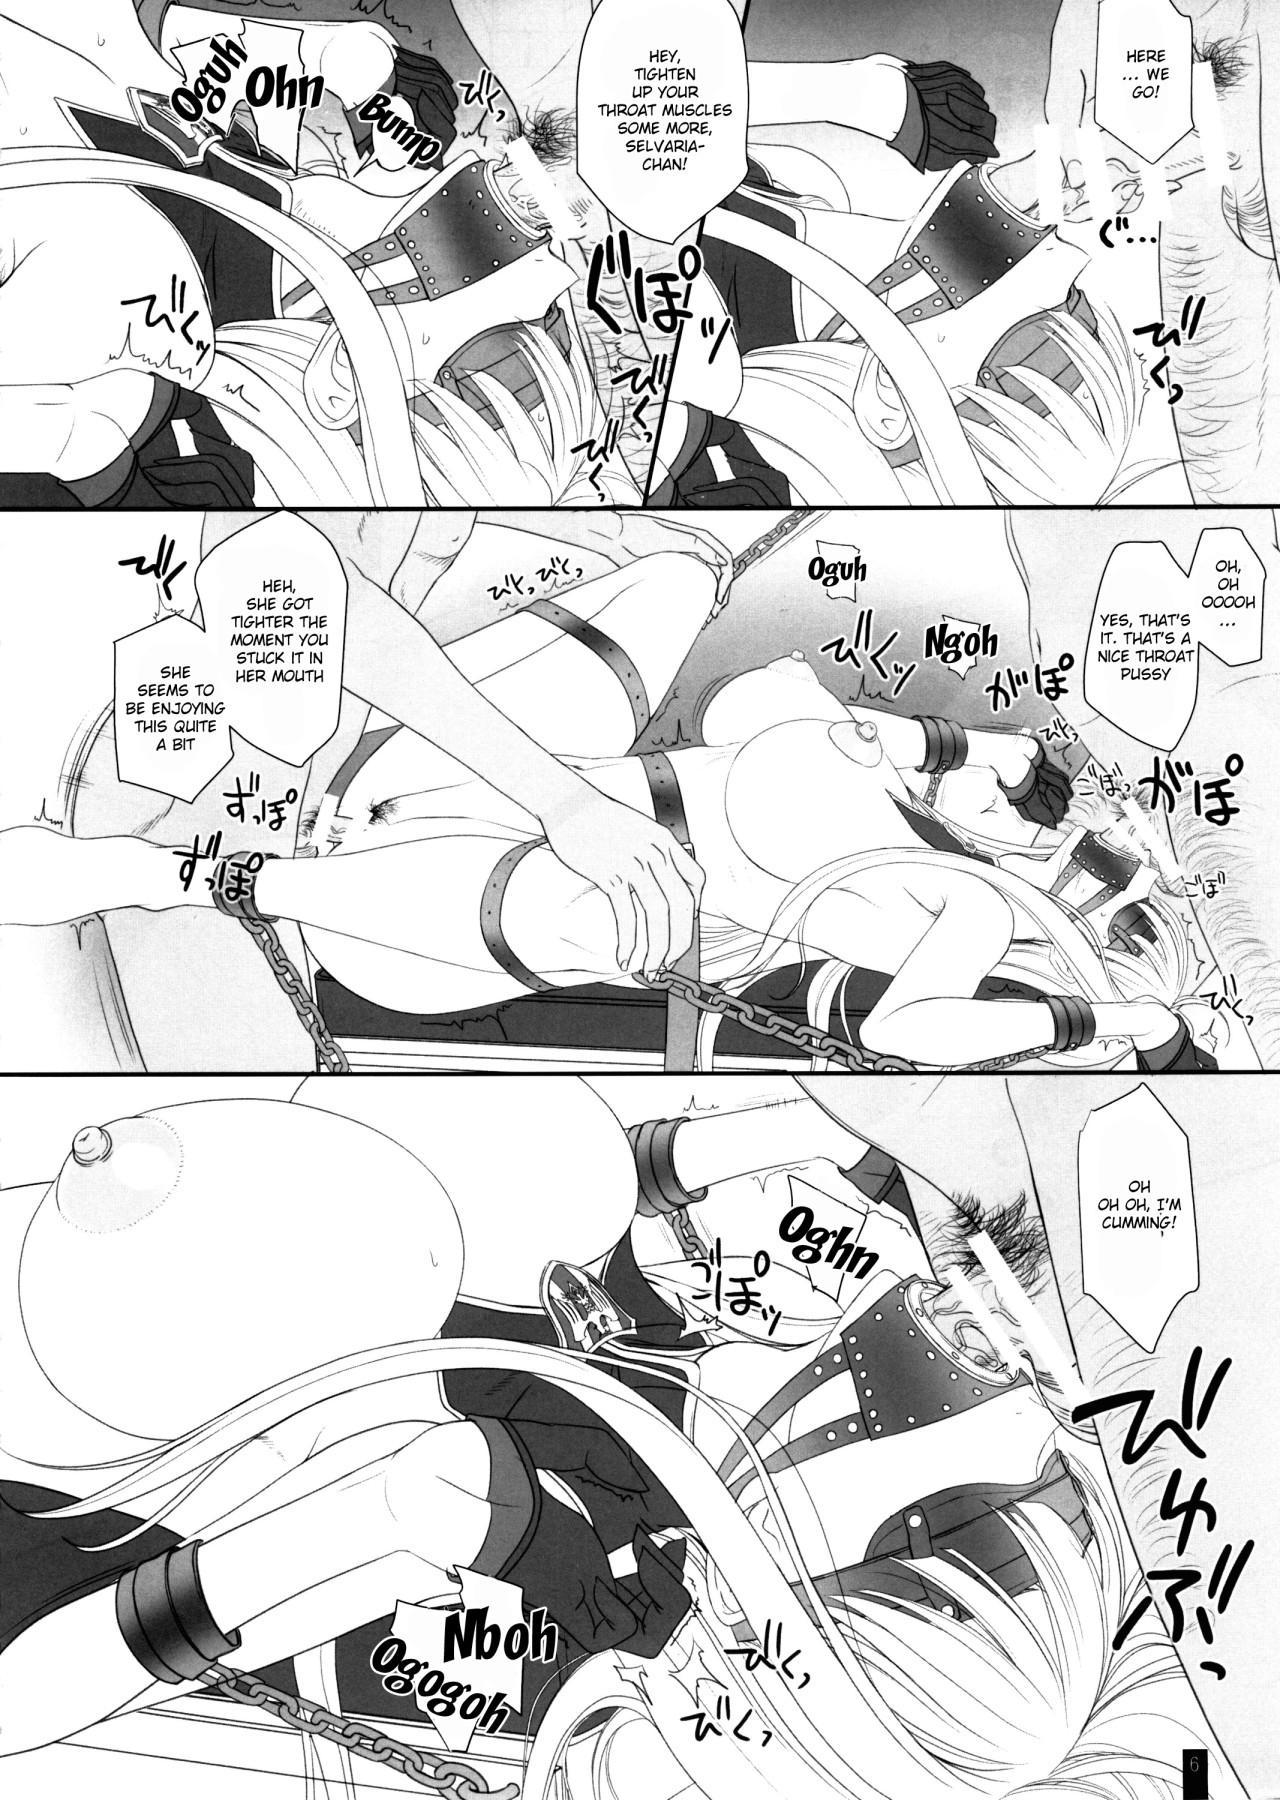 Girlfriend CAPITULATION 2 - Valkyria chronicles Fucking Pussy - Page 4